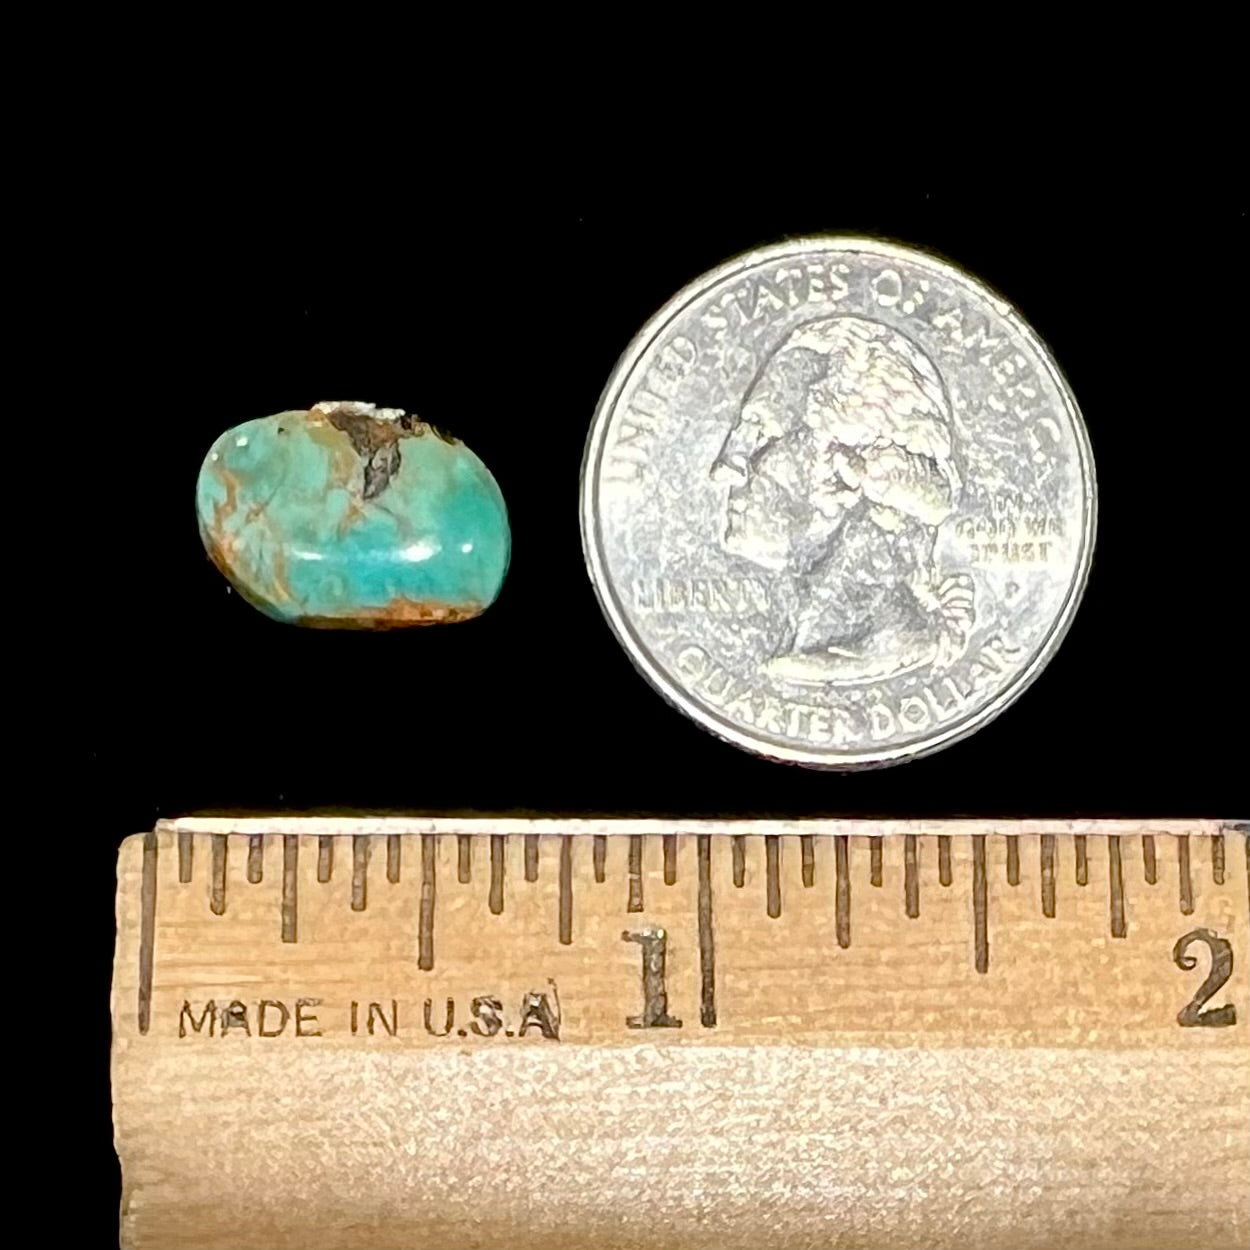 A loose, greenish blue Royston turquoise stone from Nevada.  The stone has brown and black matrix.